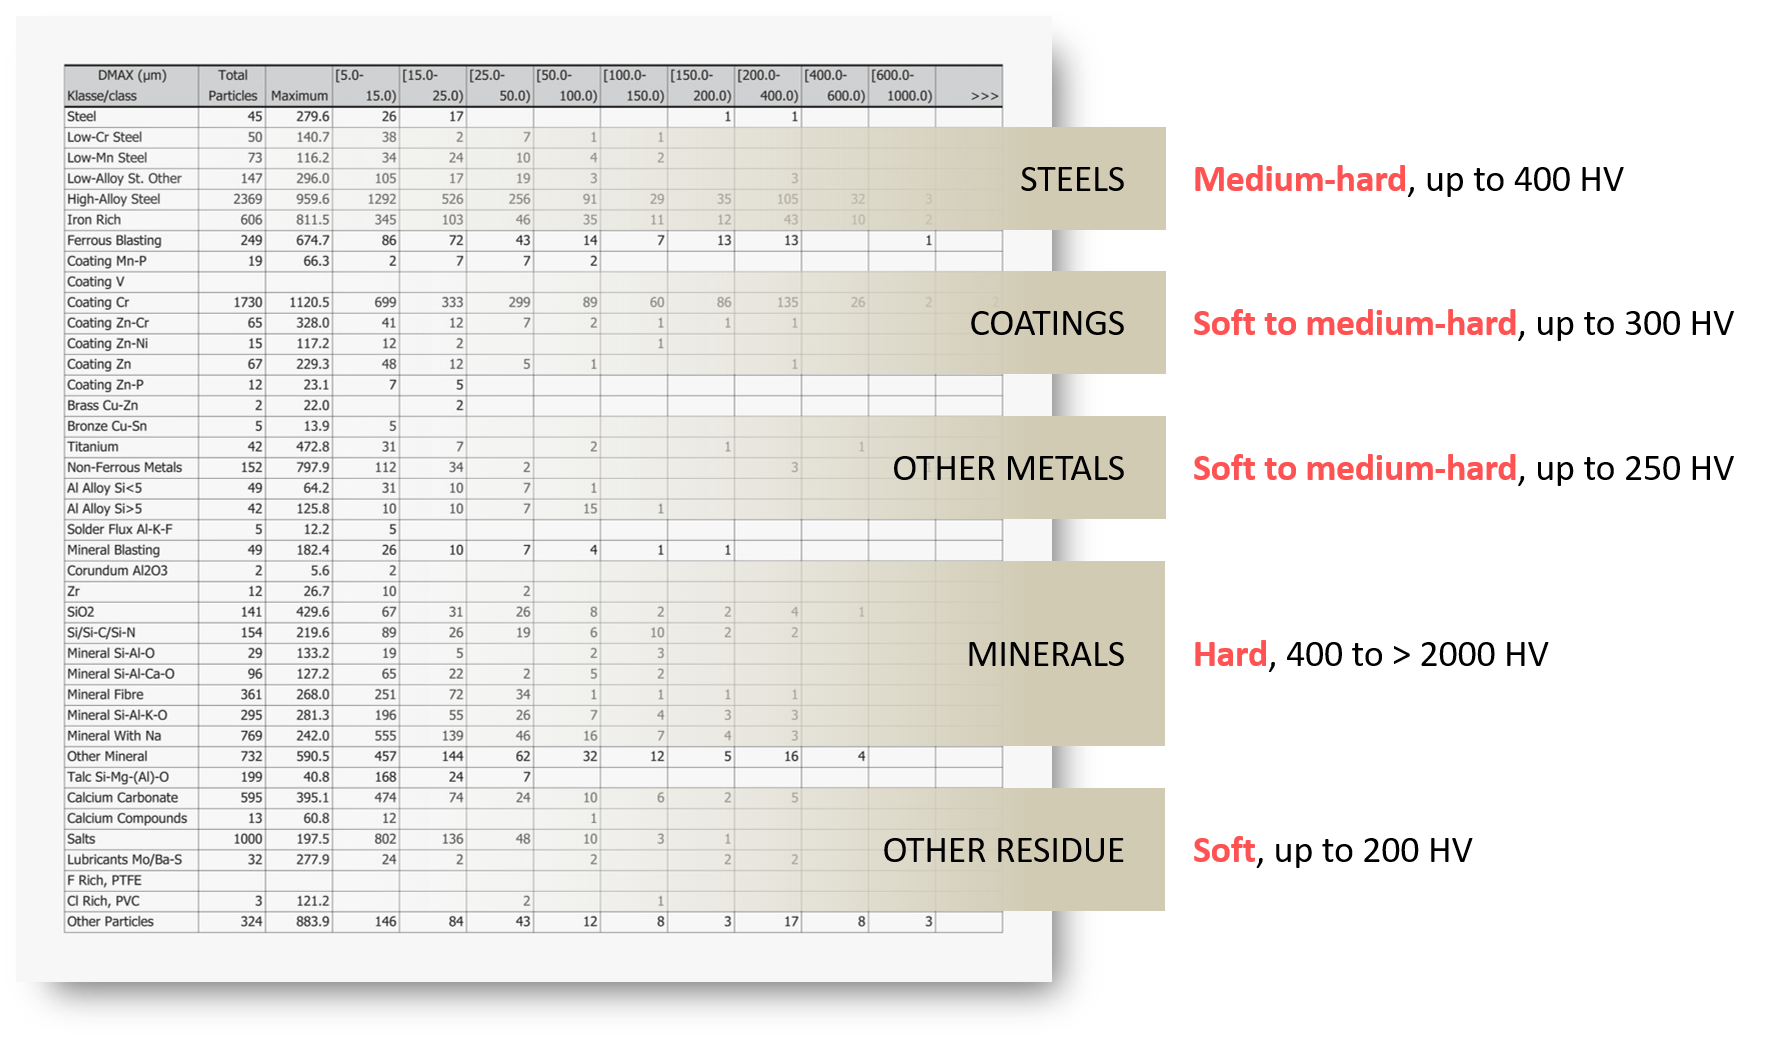 SEM-EDX Analysis of Particles - Hardness Categories